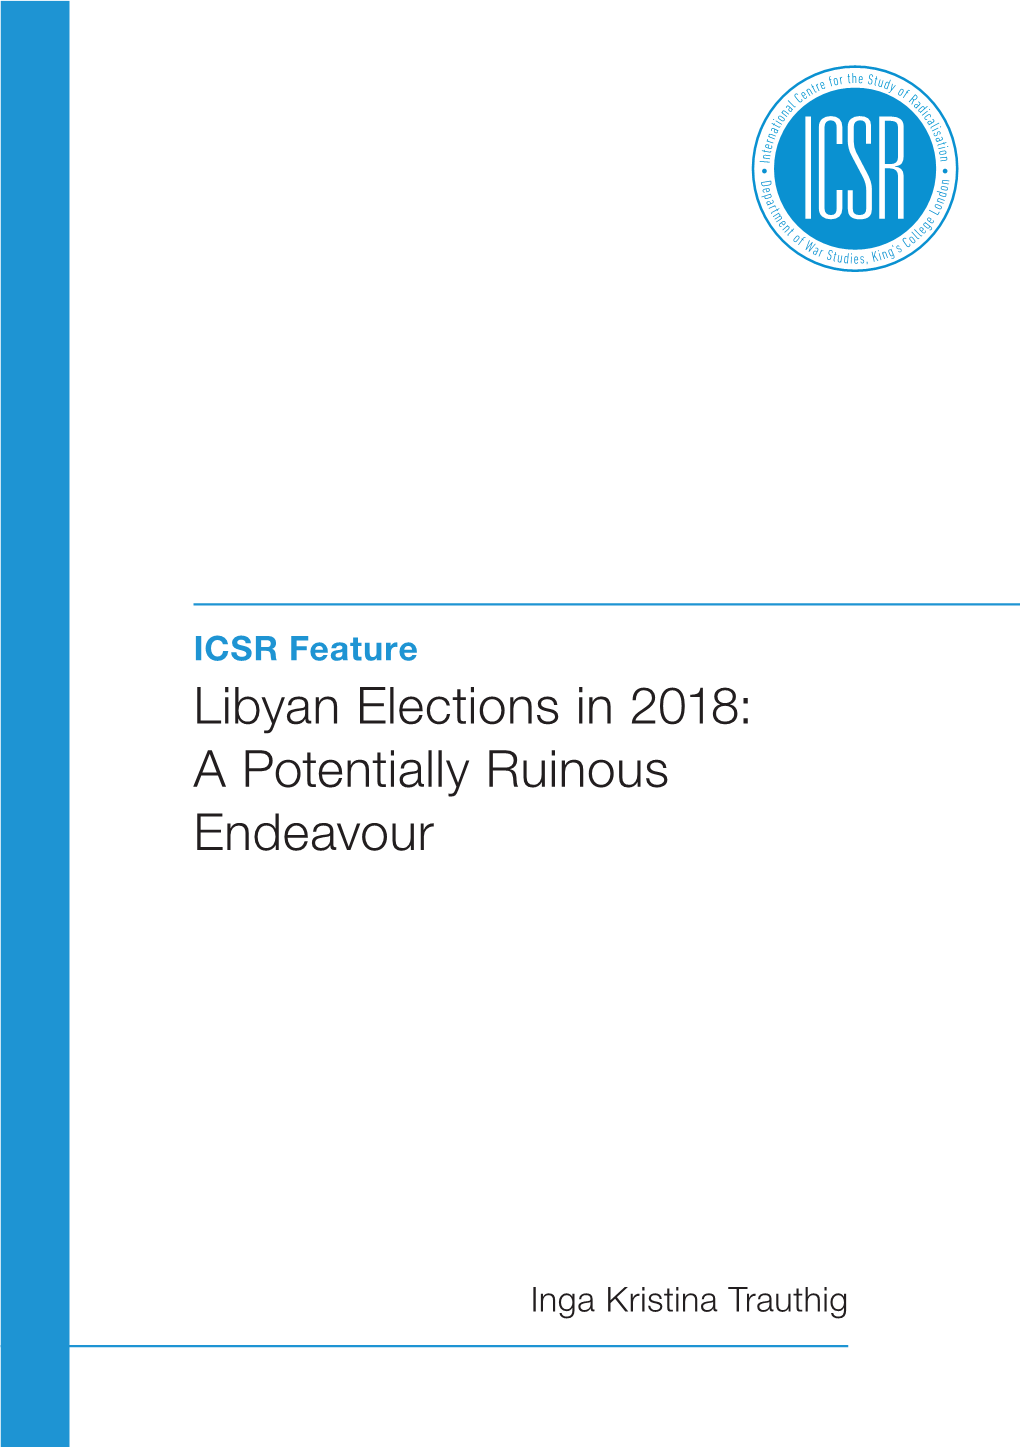 Libyan Elections in 2018: a Potentially Ruinous Endeavour